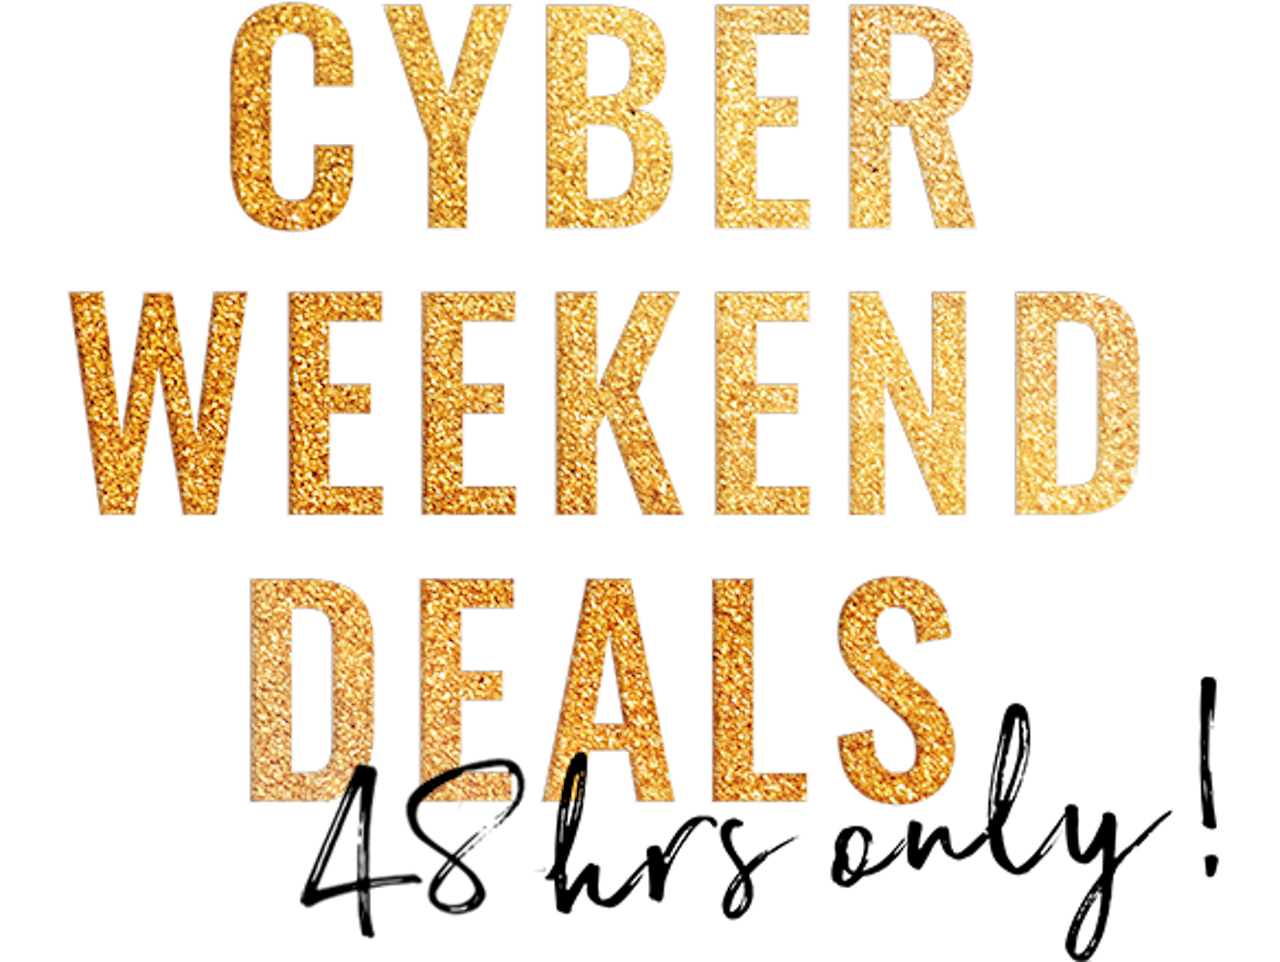 Sparkling golden text reading "Cyber Weekend Deals" with a glitter effect, suggesting exclusive online shopping discounts during a holiday sale event.